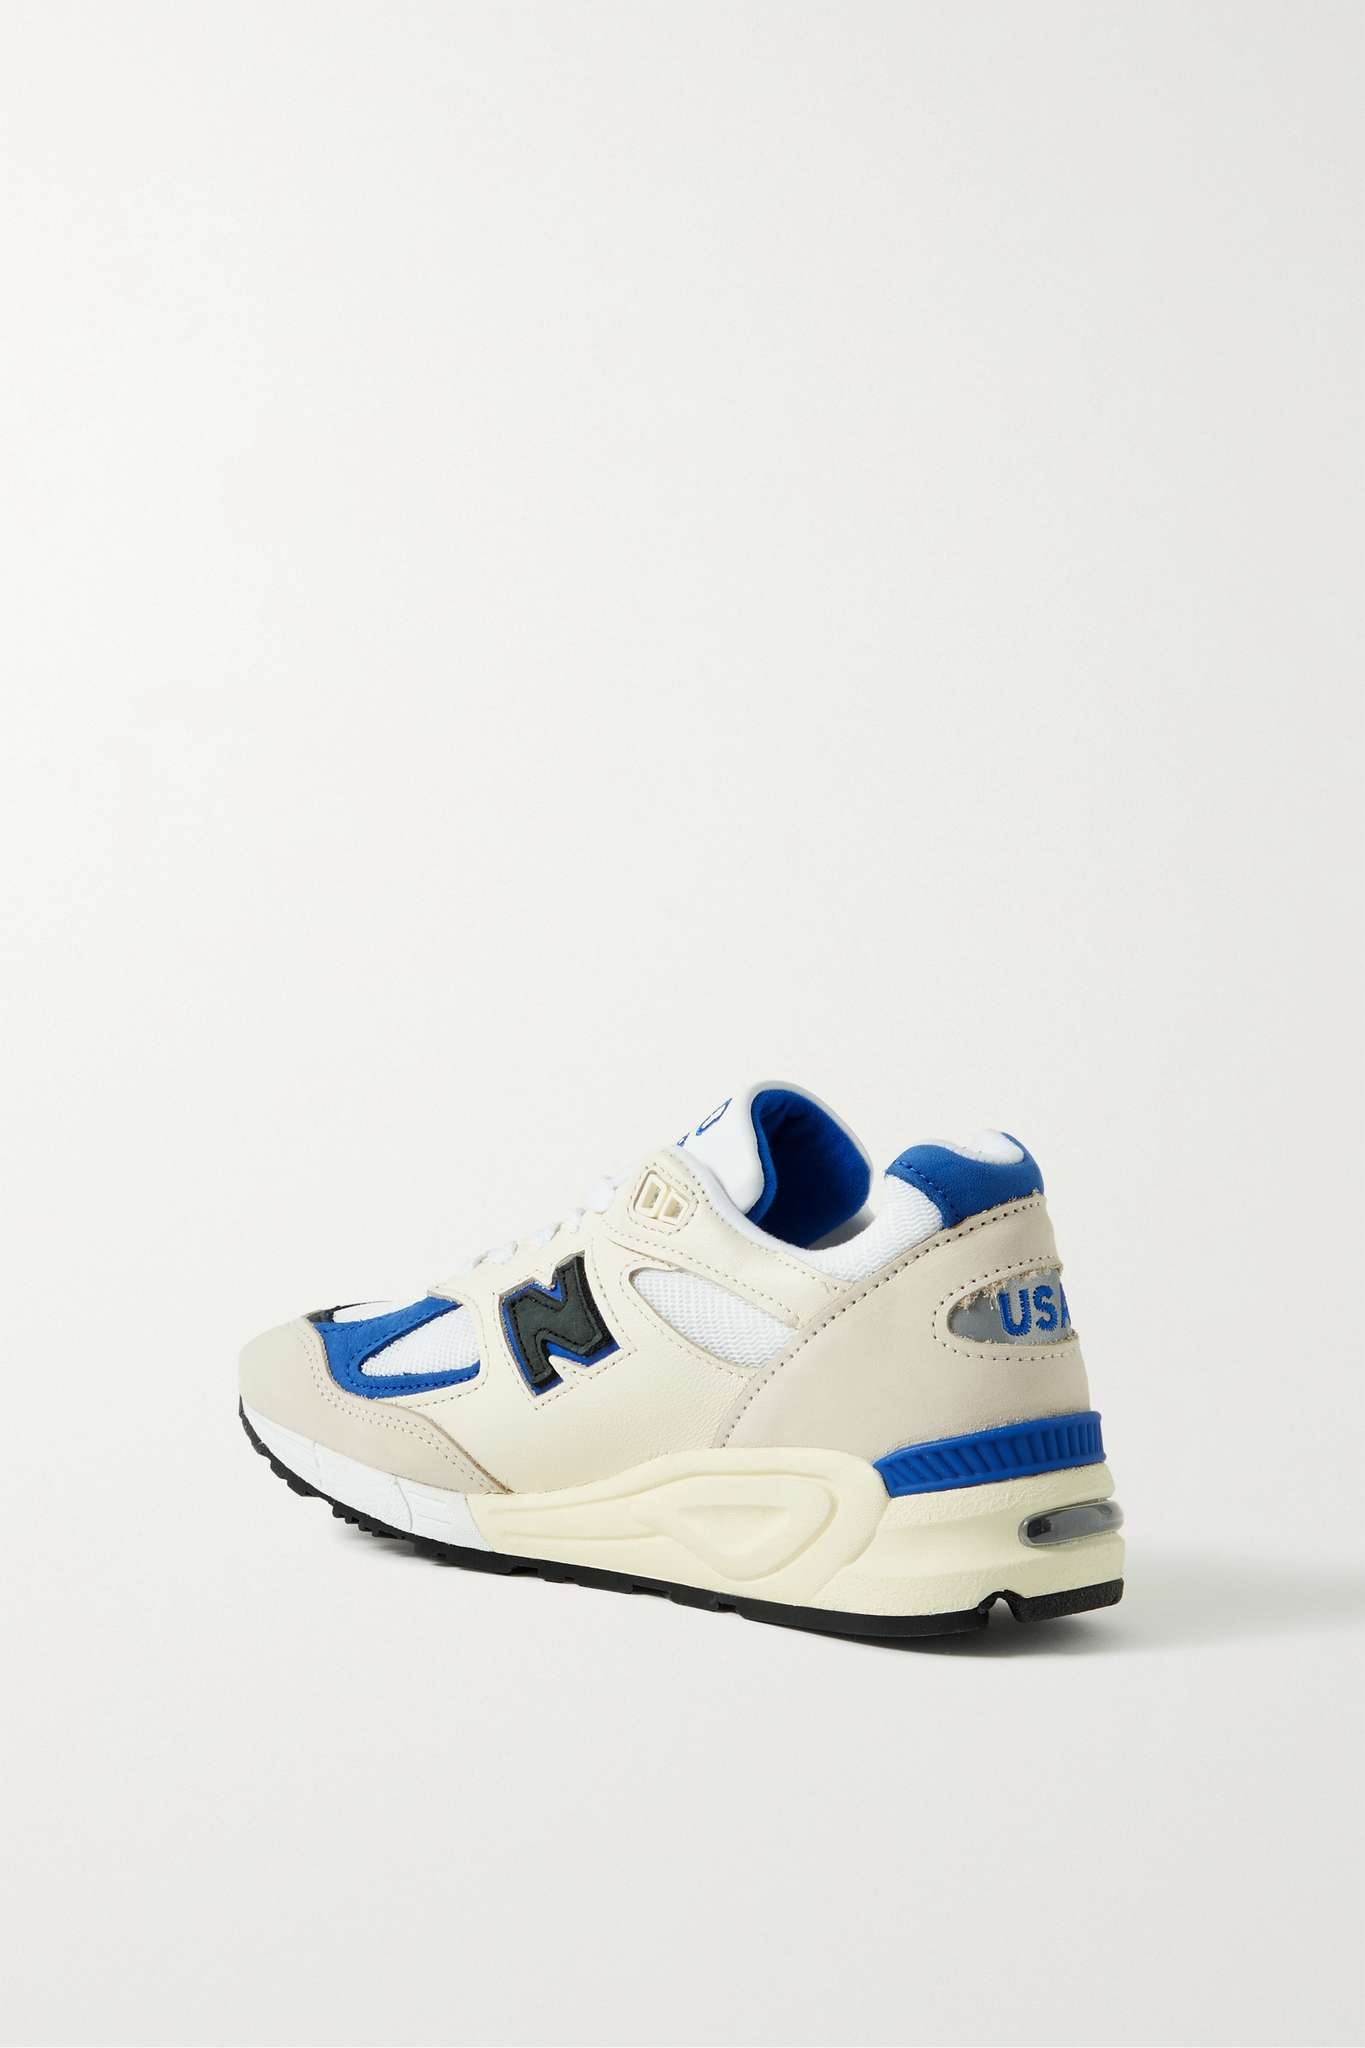 Teddy Santis 990 v2 leather and suede-trimmed mesh sneakers - 3